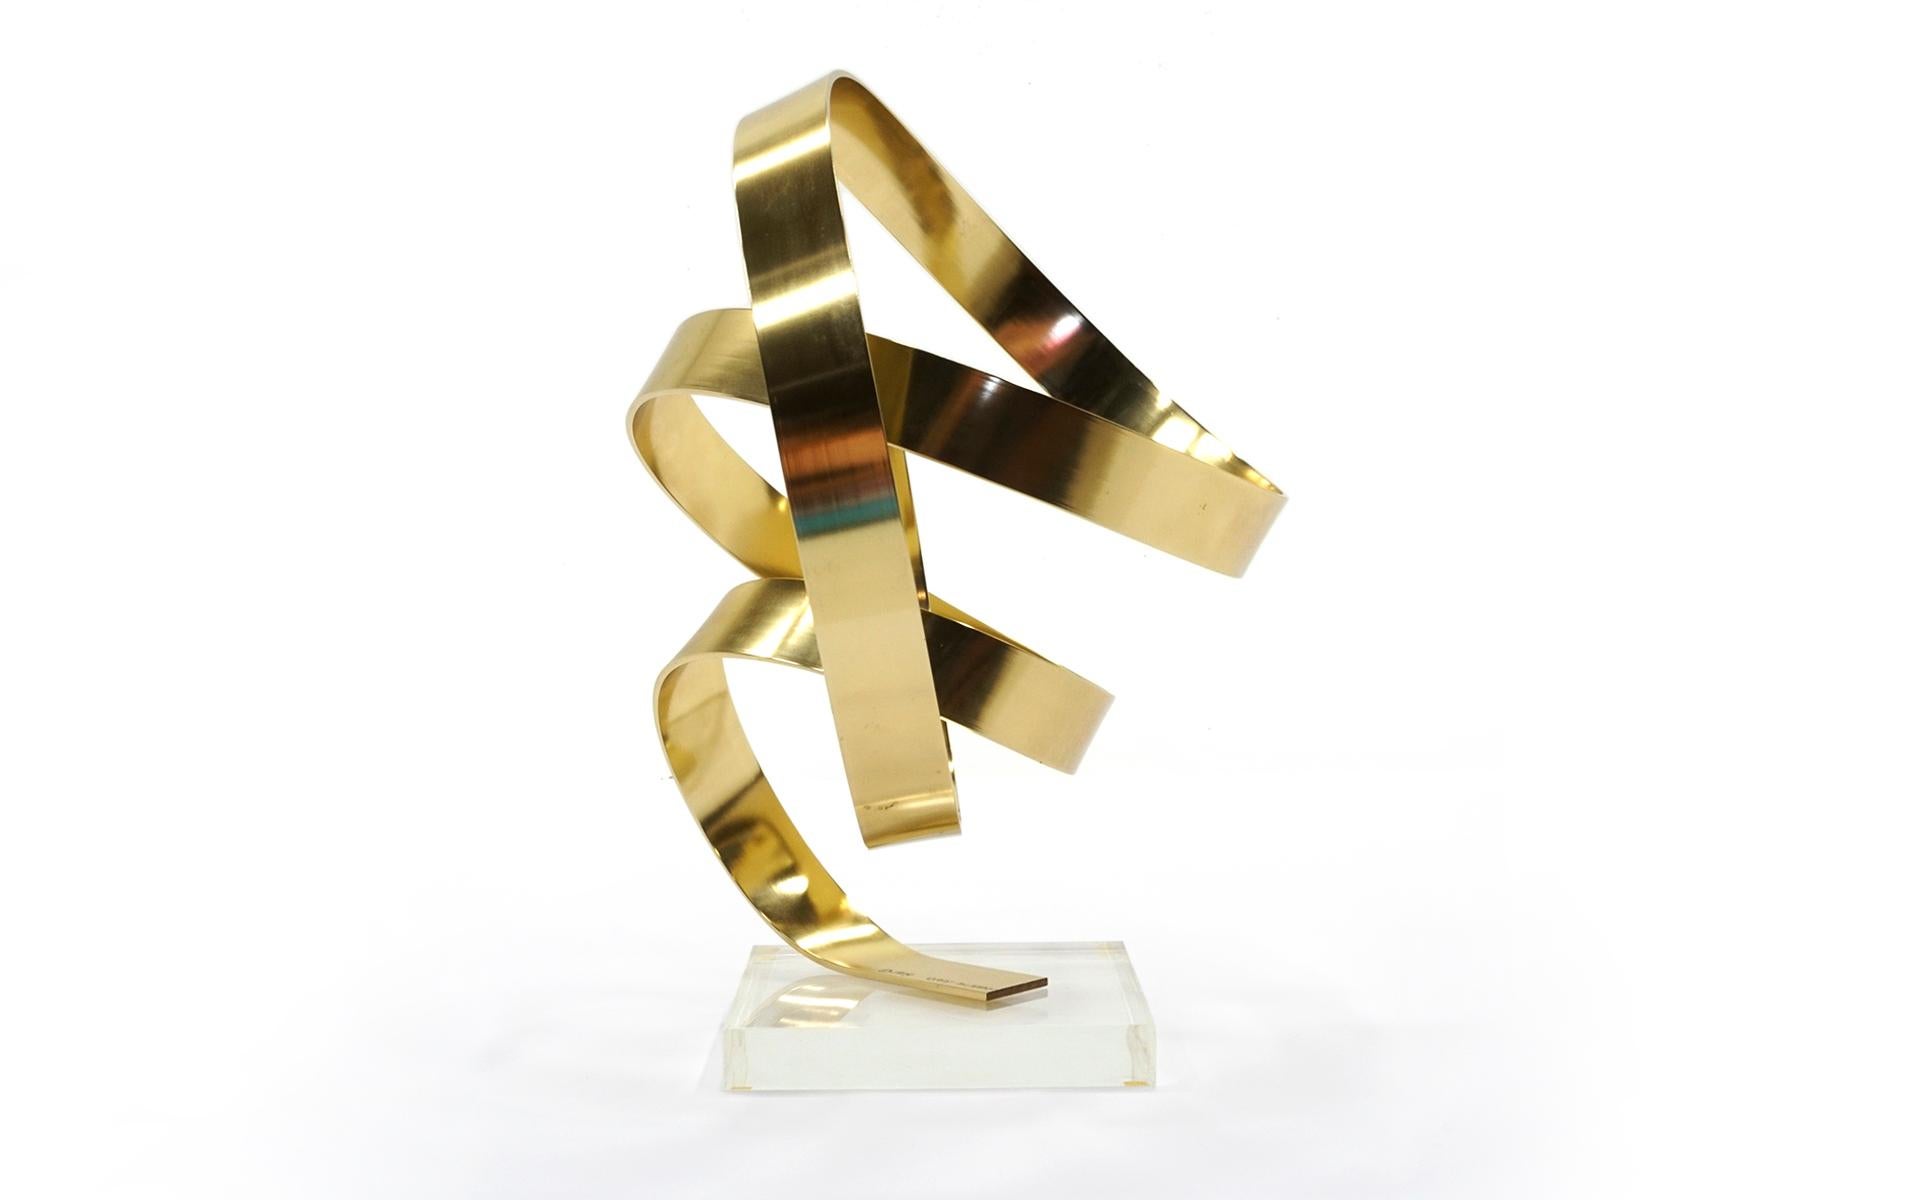 Mid-Century Modern Brass and Lucite Table Top Abstract Sculpture, Signed & Dated, Dan Murphy, 1979 For Sale